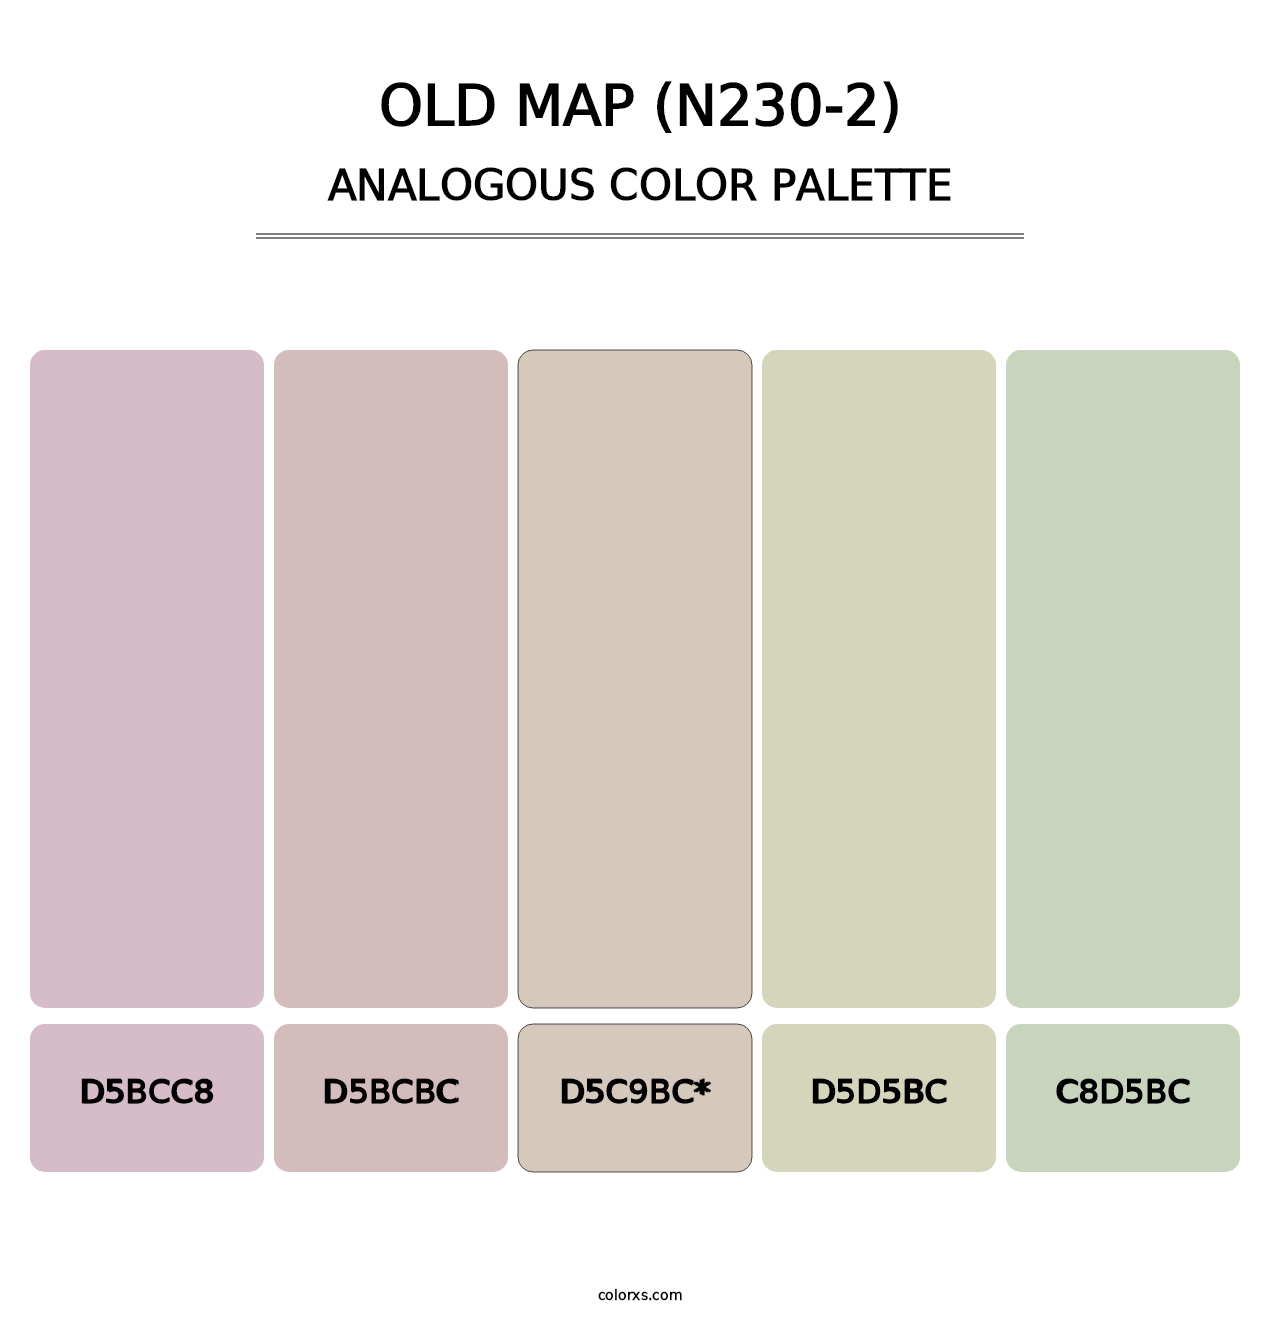 Old Map (N230-2) - Analogous Color Palette